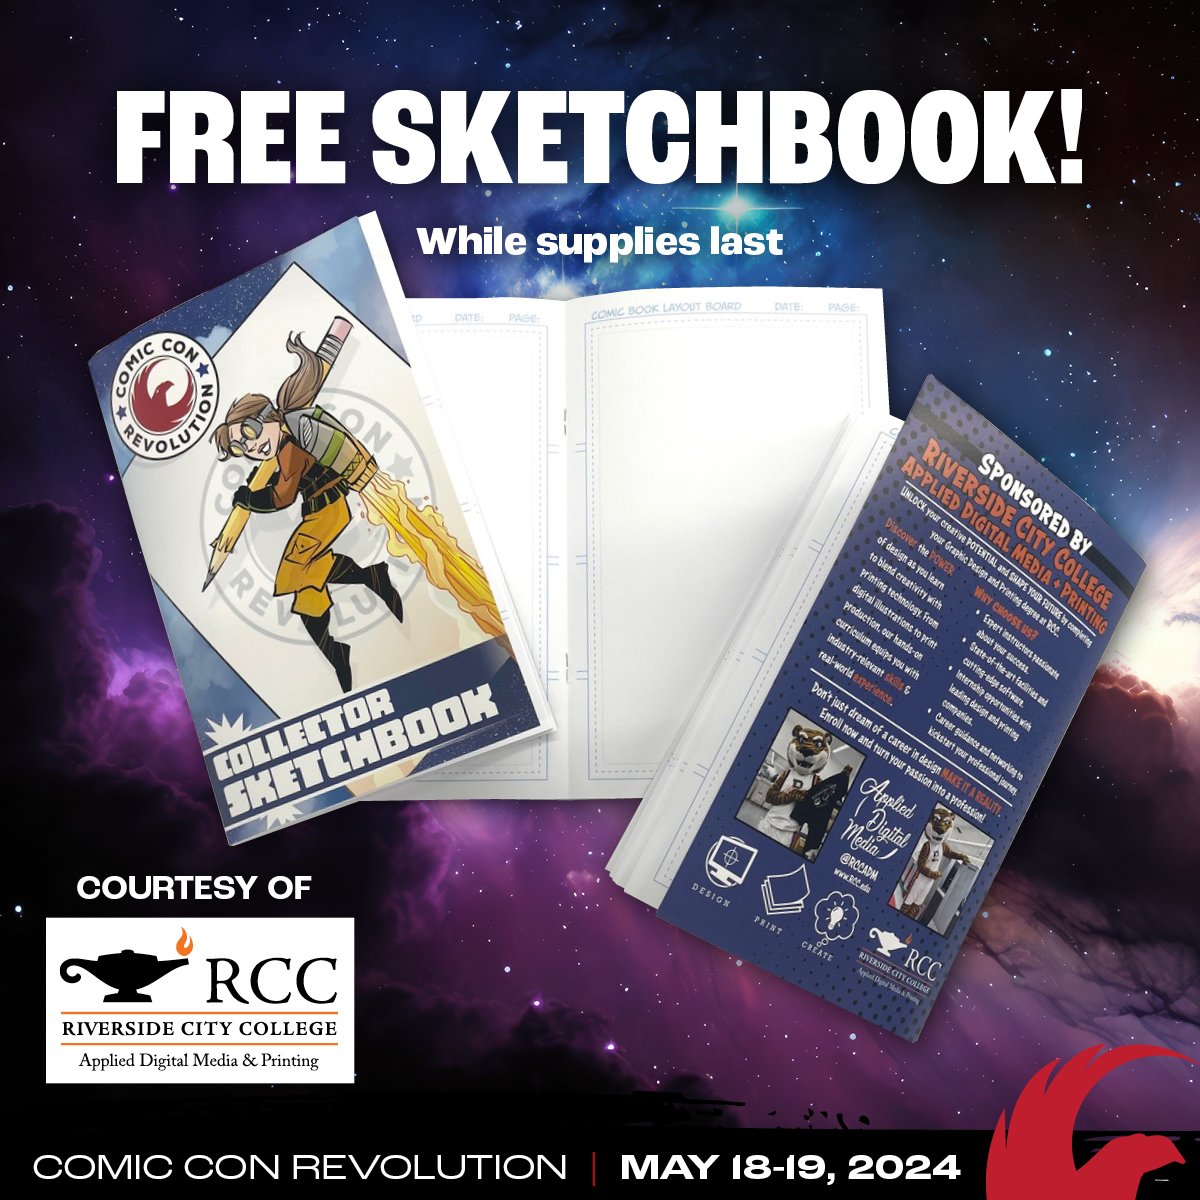 ✏ Get your FREE SKETCHBOOK (while supplies last each day!) thanks to our #ComicConRevolution sponsor Riverside Community College! Pick up yours early before they run out! Tix: CCRTix.com #comiccon #inlandempire #sanbernardino #ontariocalifornia #socal